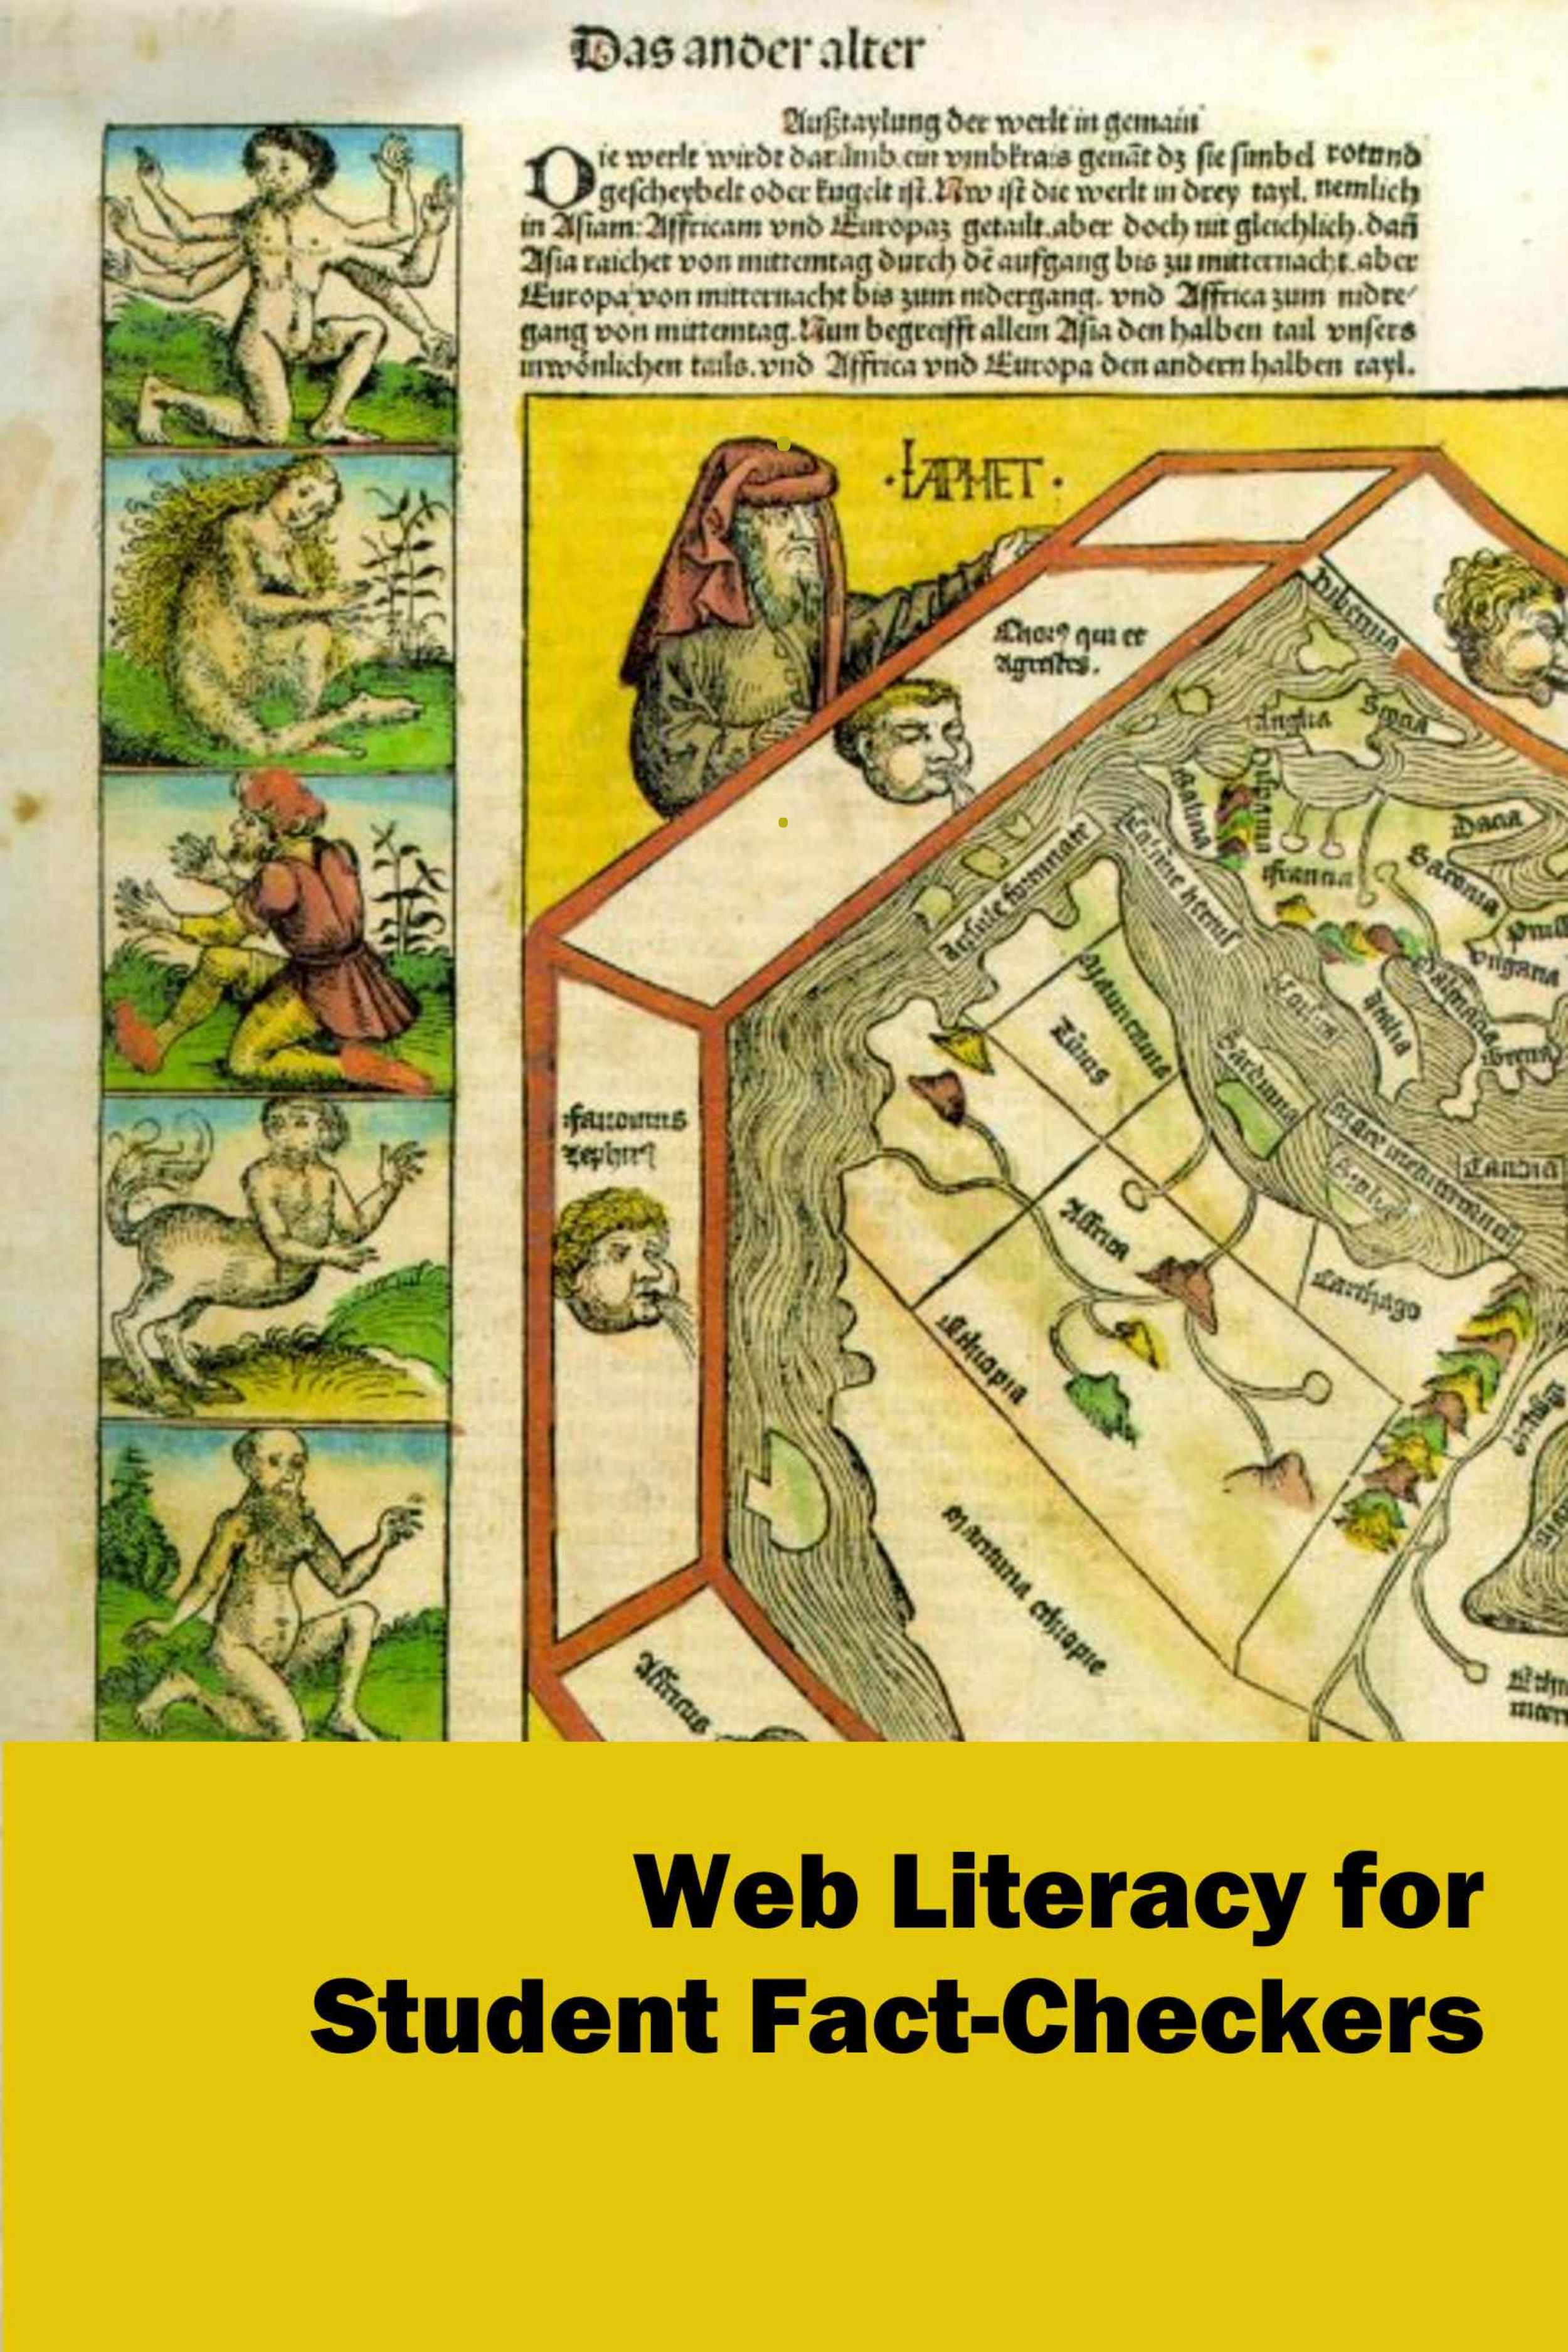 Read more about Web Literacy for Student Fact-Checkers